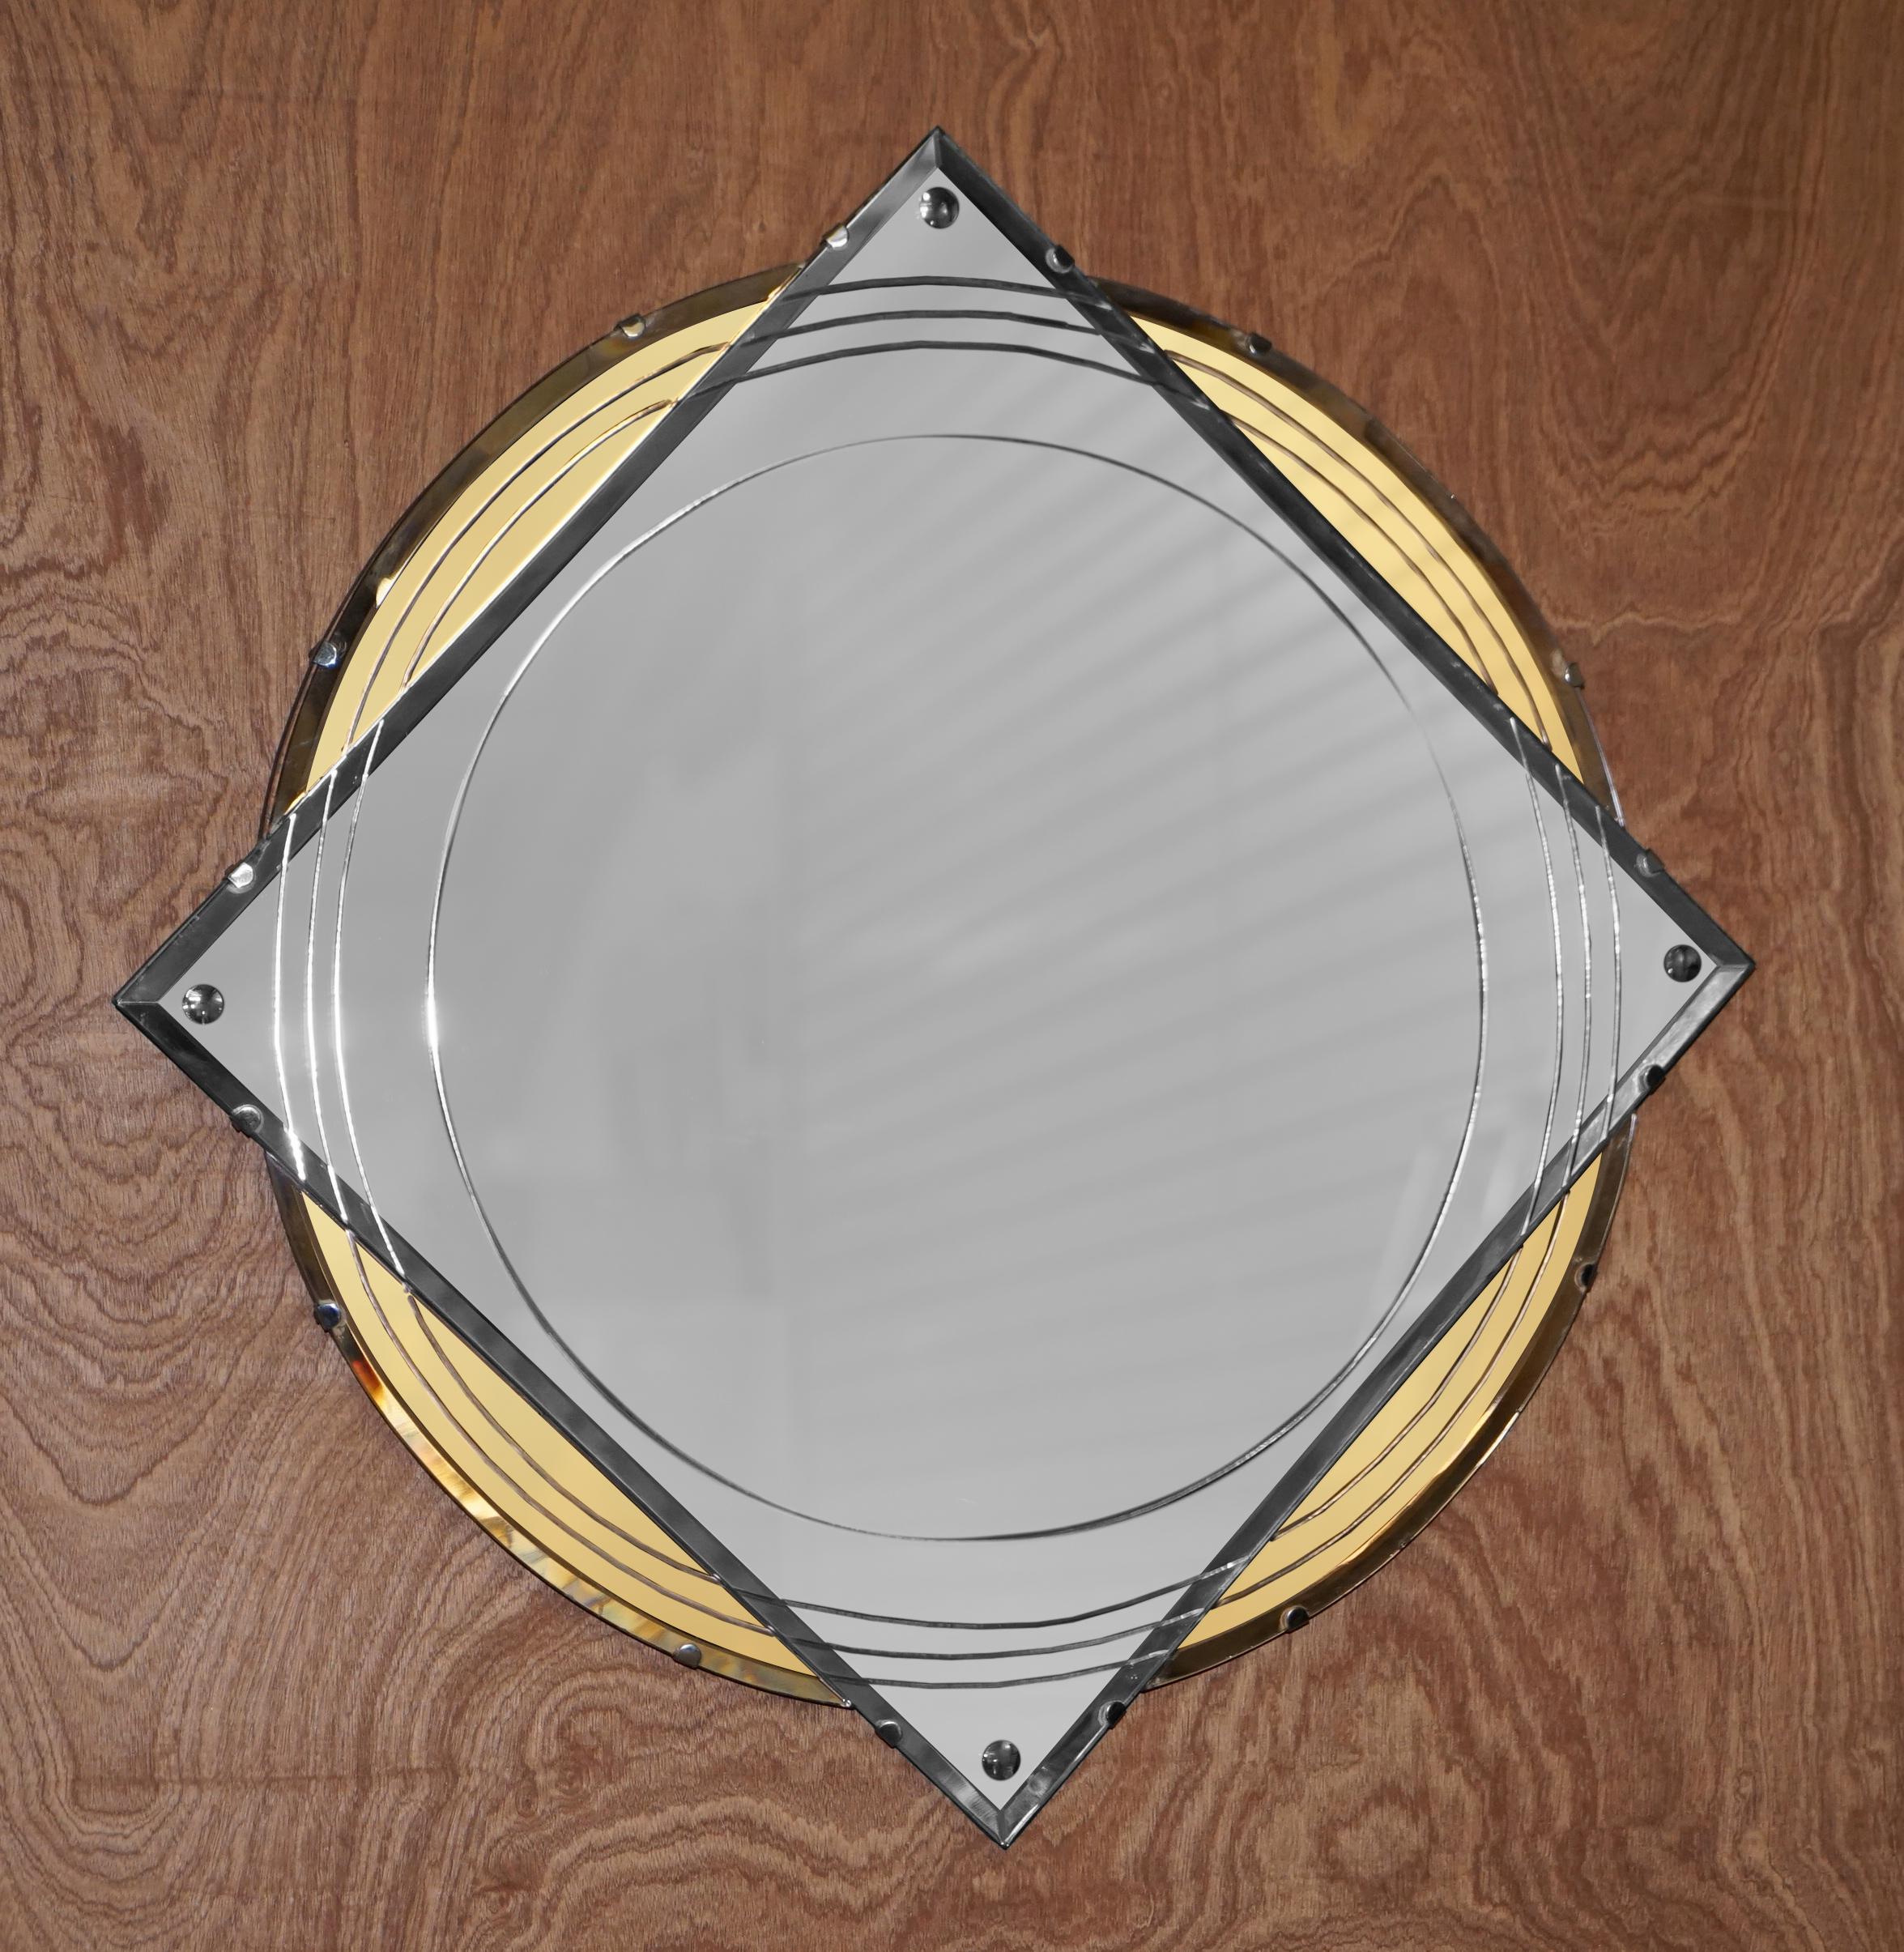 We are delighted to offer for sale absolutely sublime Amber glass Art Deco wall mirror with Georgian Irish style detailing

A very decorative piece, the circle sections are amber glass which looks gold in the pictures but in the normal light its